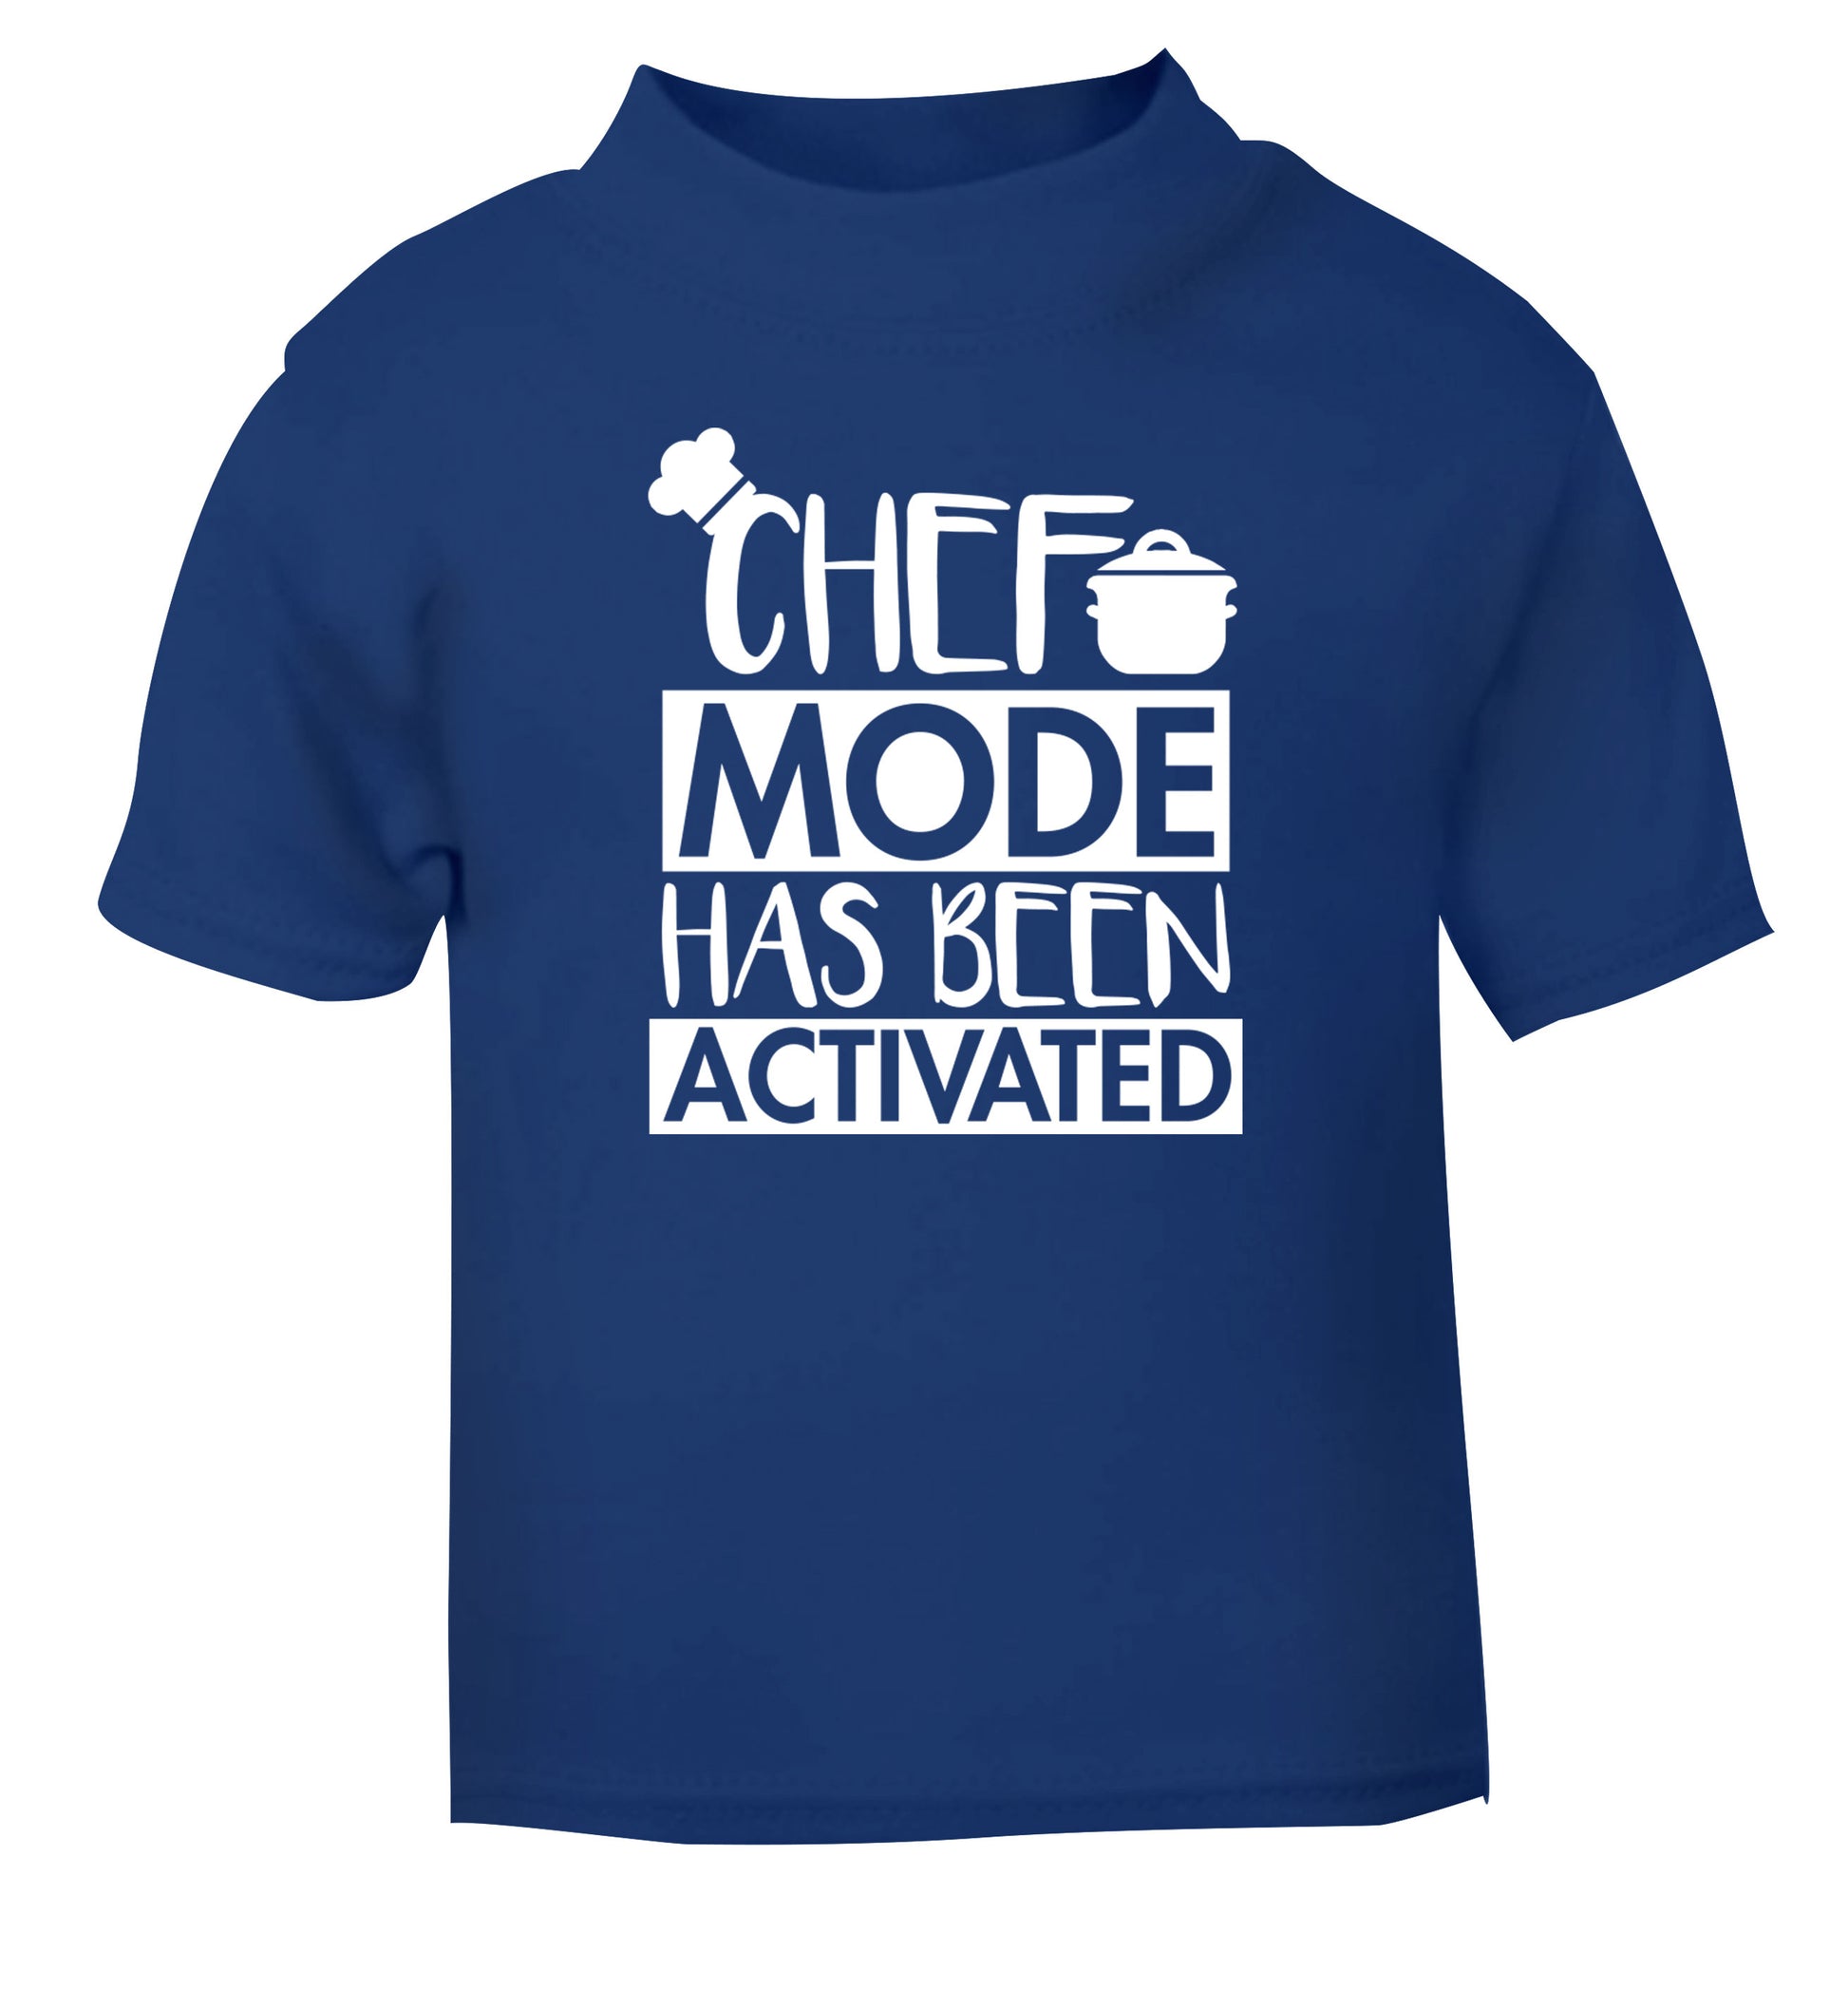 Chef mode has been activated blue Baby Toddler Tshirt 2 Years